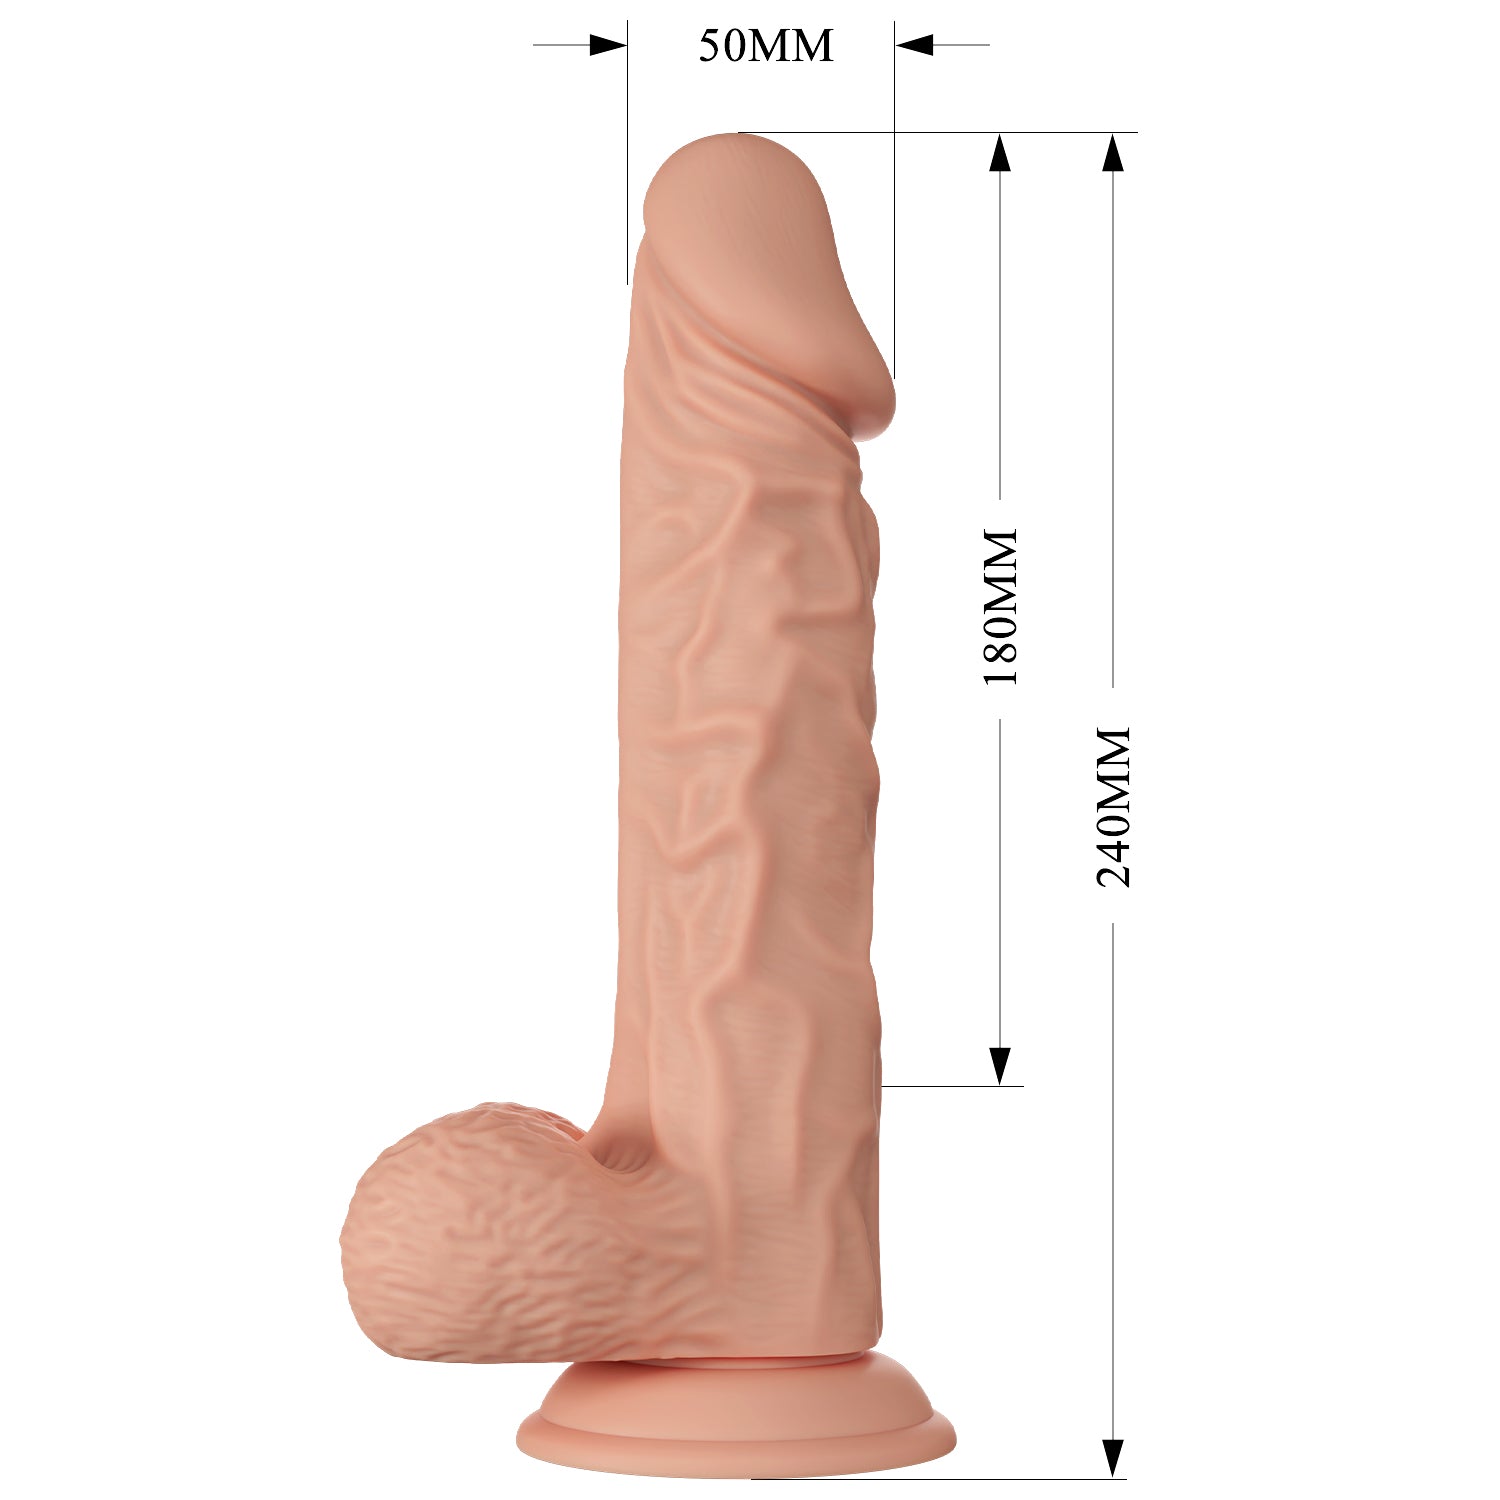 Baile 9.4 Inch Lifelike Dildo With Suction Cup In Flesh